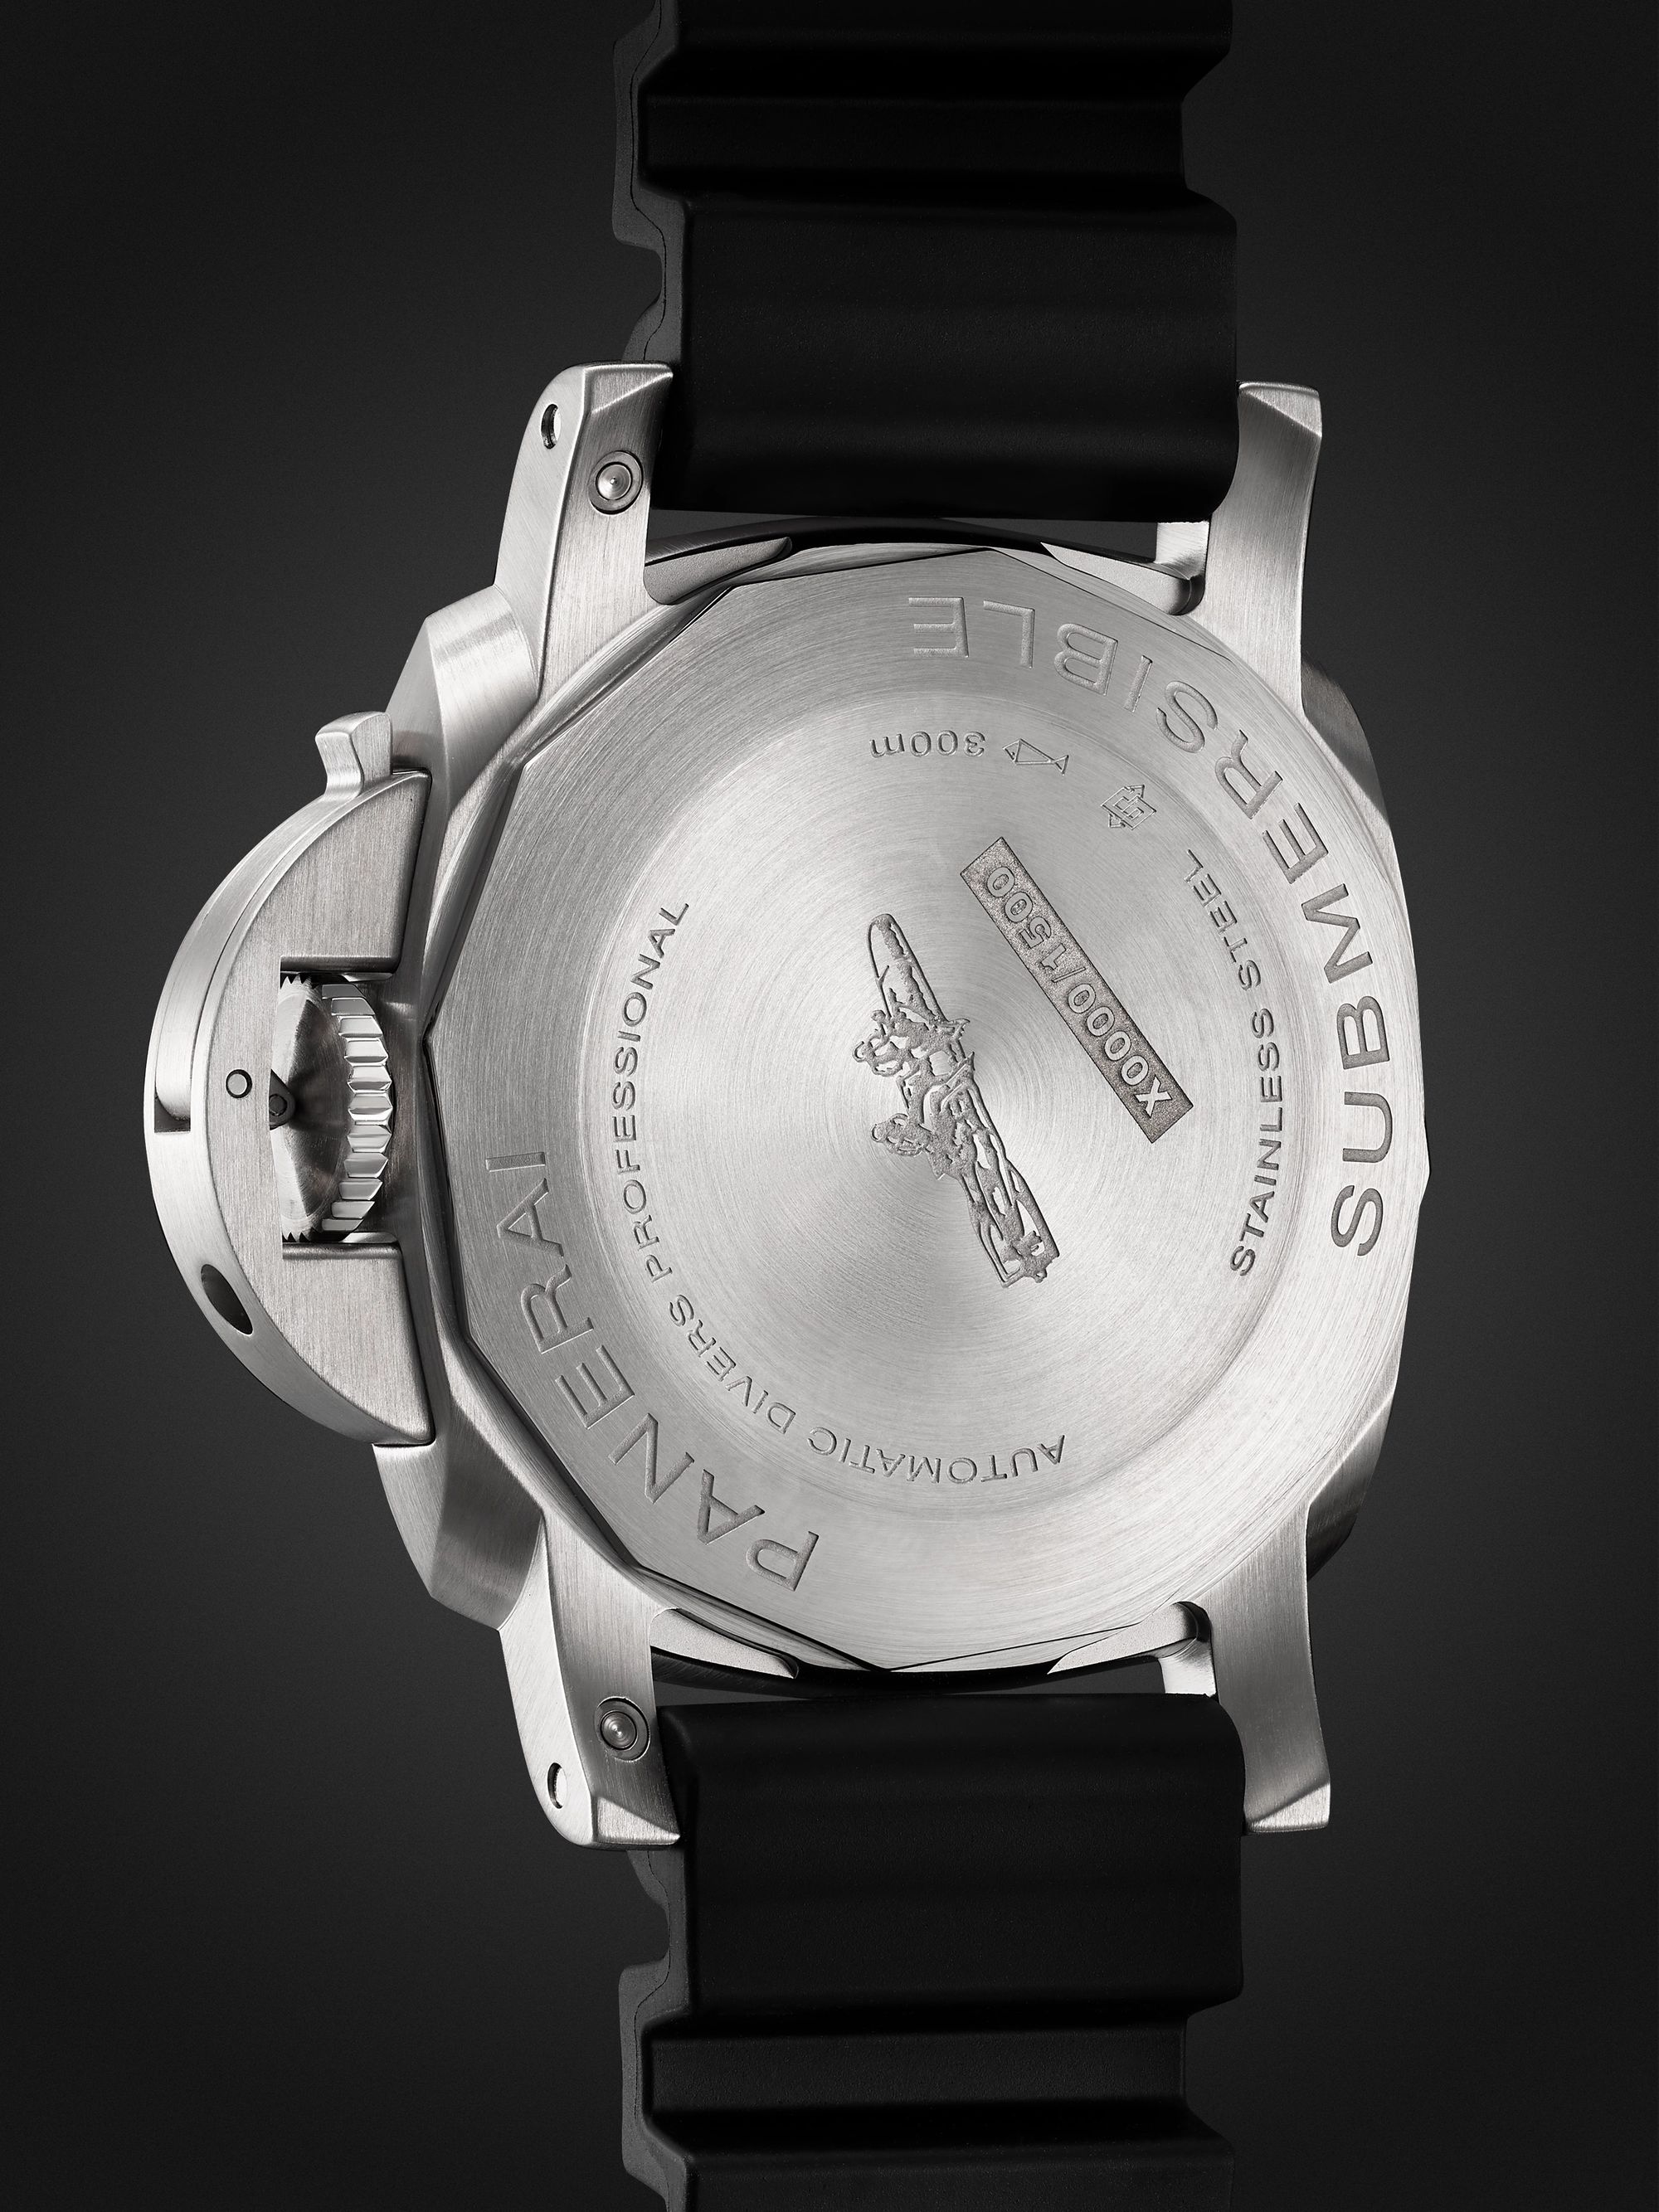 PANERAI Submersible Automatic 42mm Stainless Steel and Rubber Watch, Ref. No. PAM01223